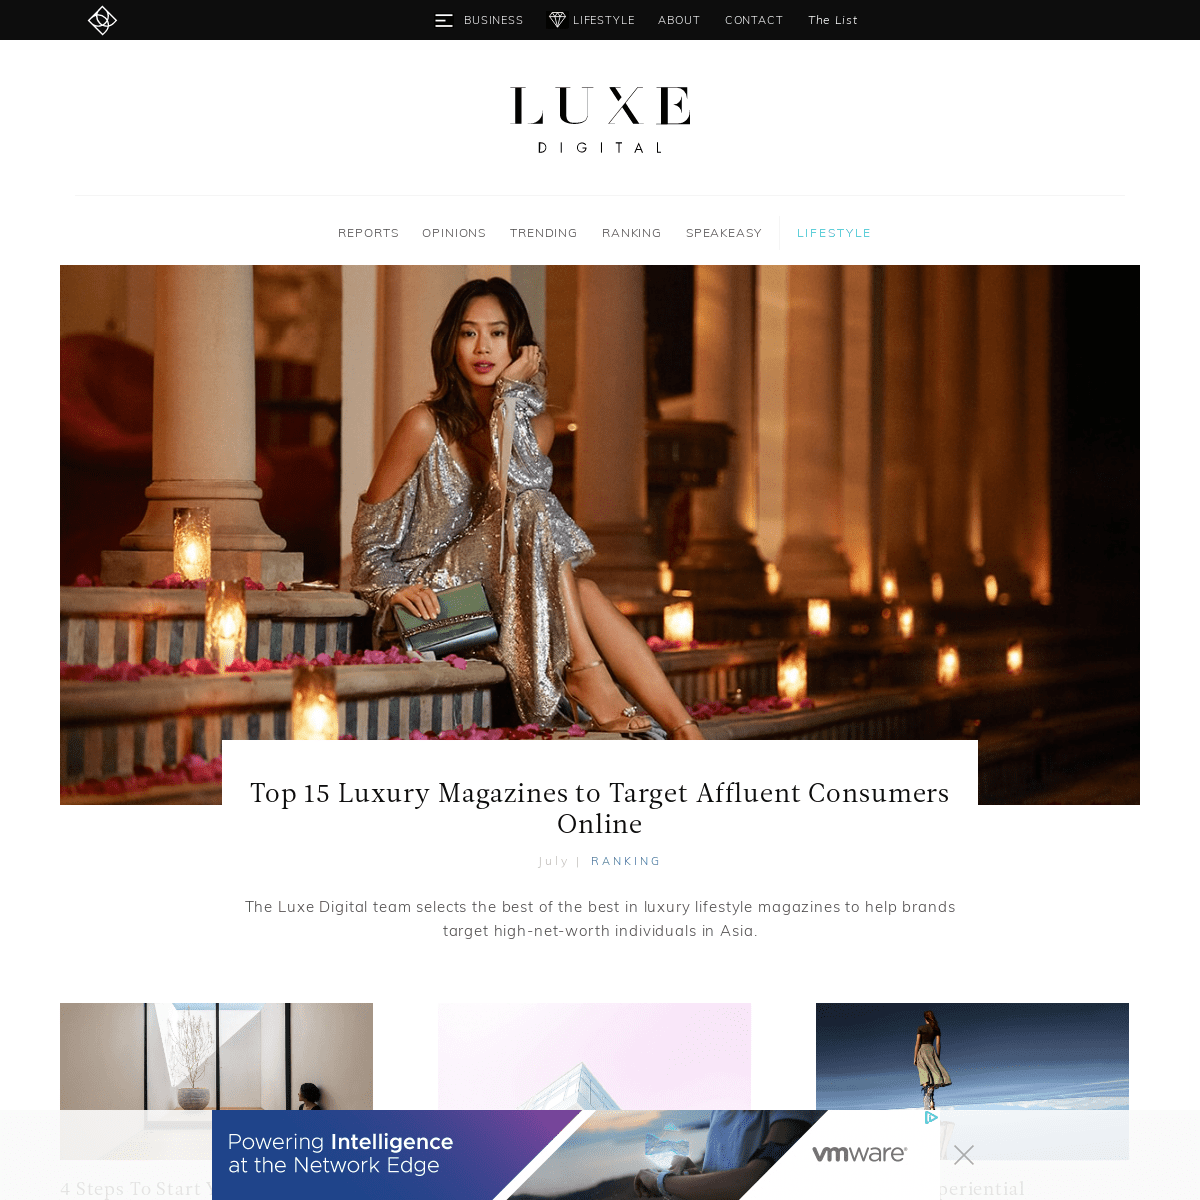 Luxe Digital, Insights into the Digital Transformation of Luxury